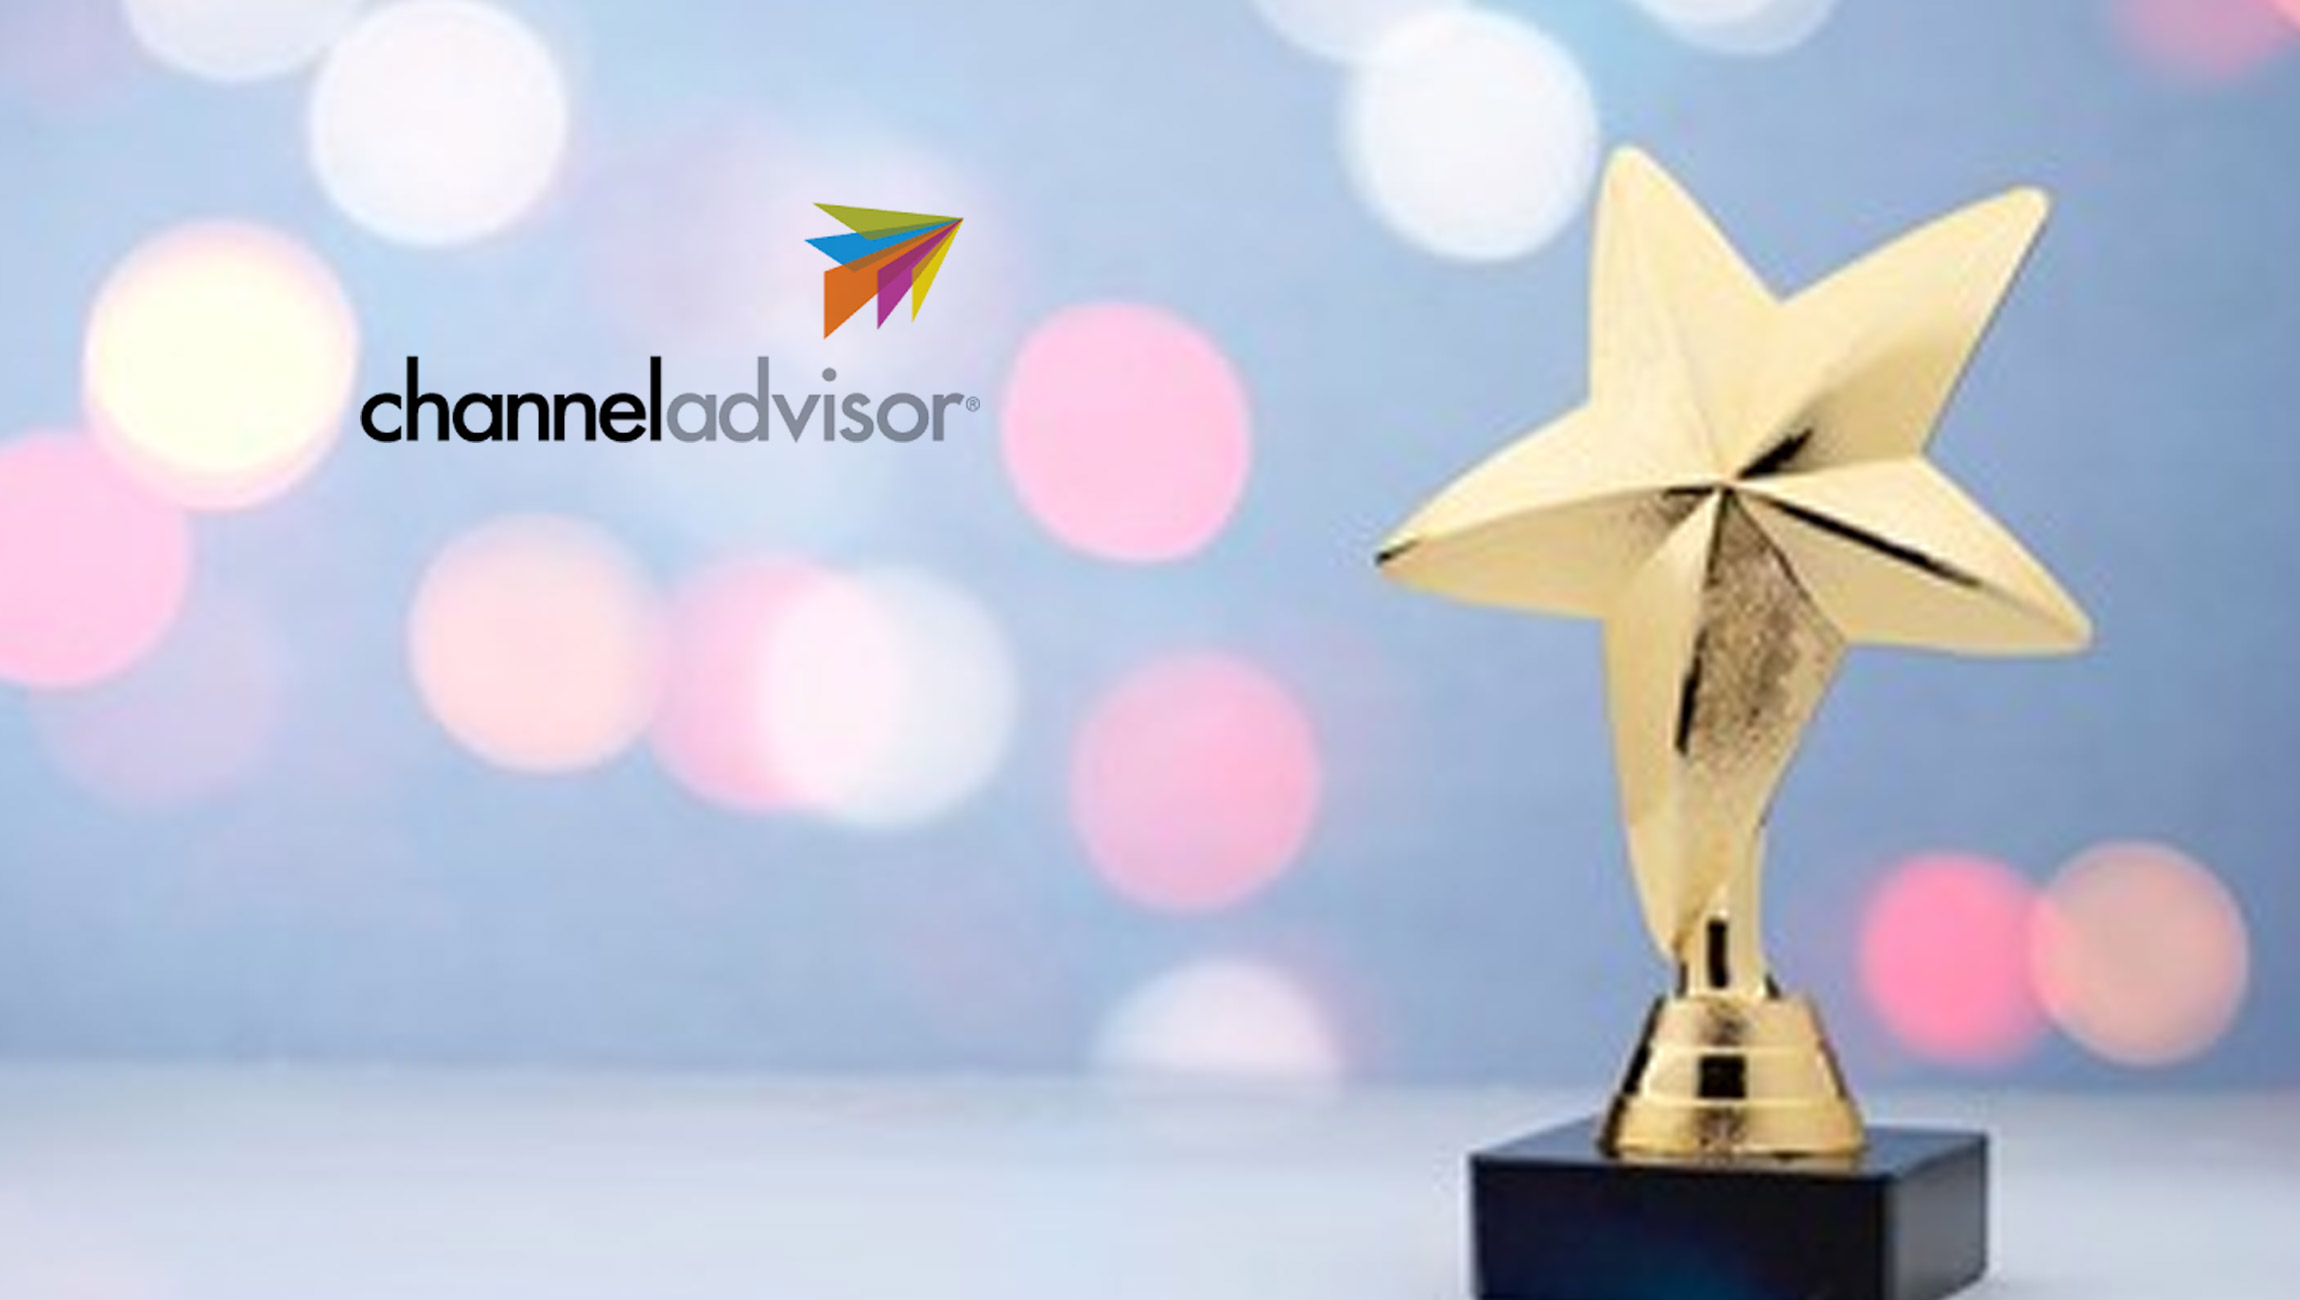 ChannelAdvisor Wins 'Best Places to Work' Award for Eighth Time